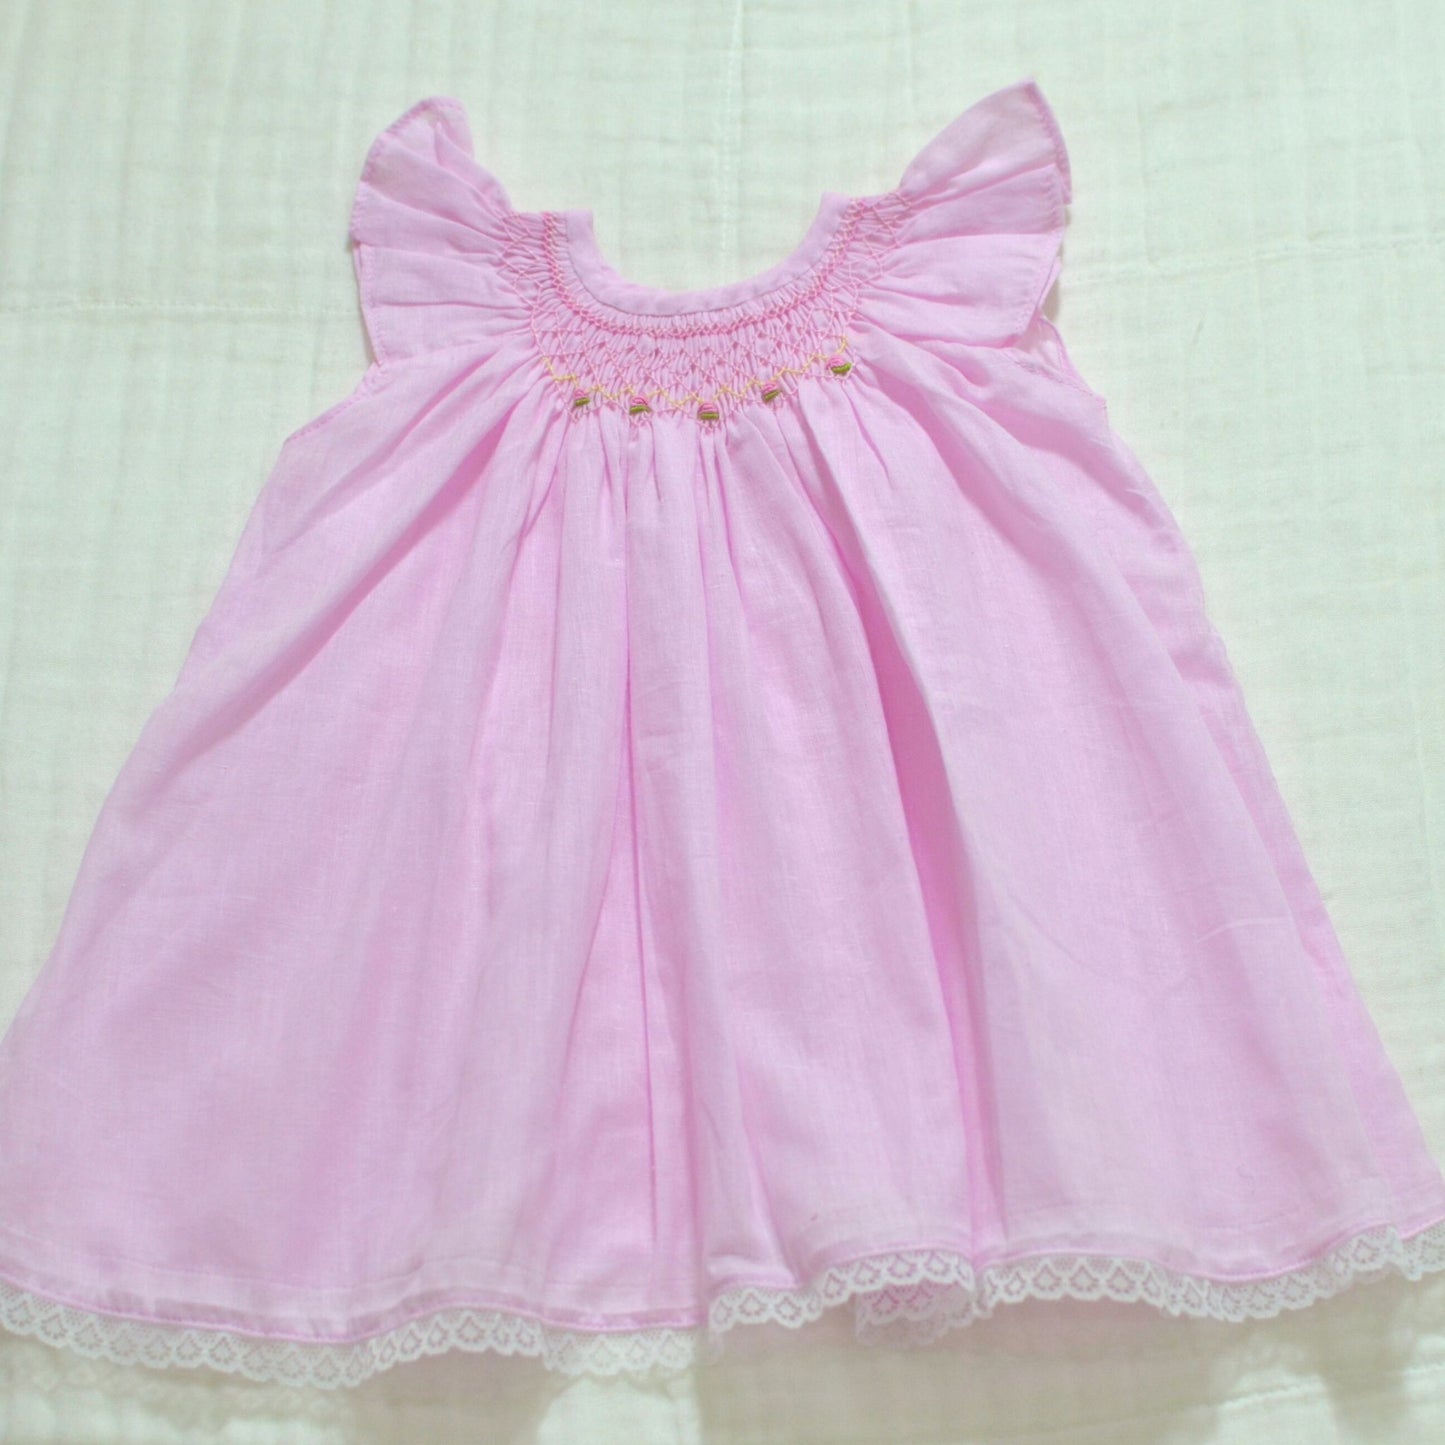 Handmade Smocked Dress Colours - 3 to 6 months